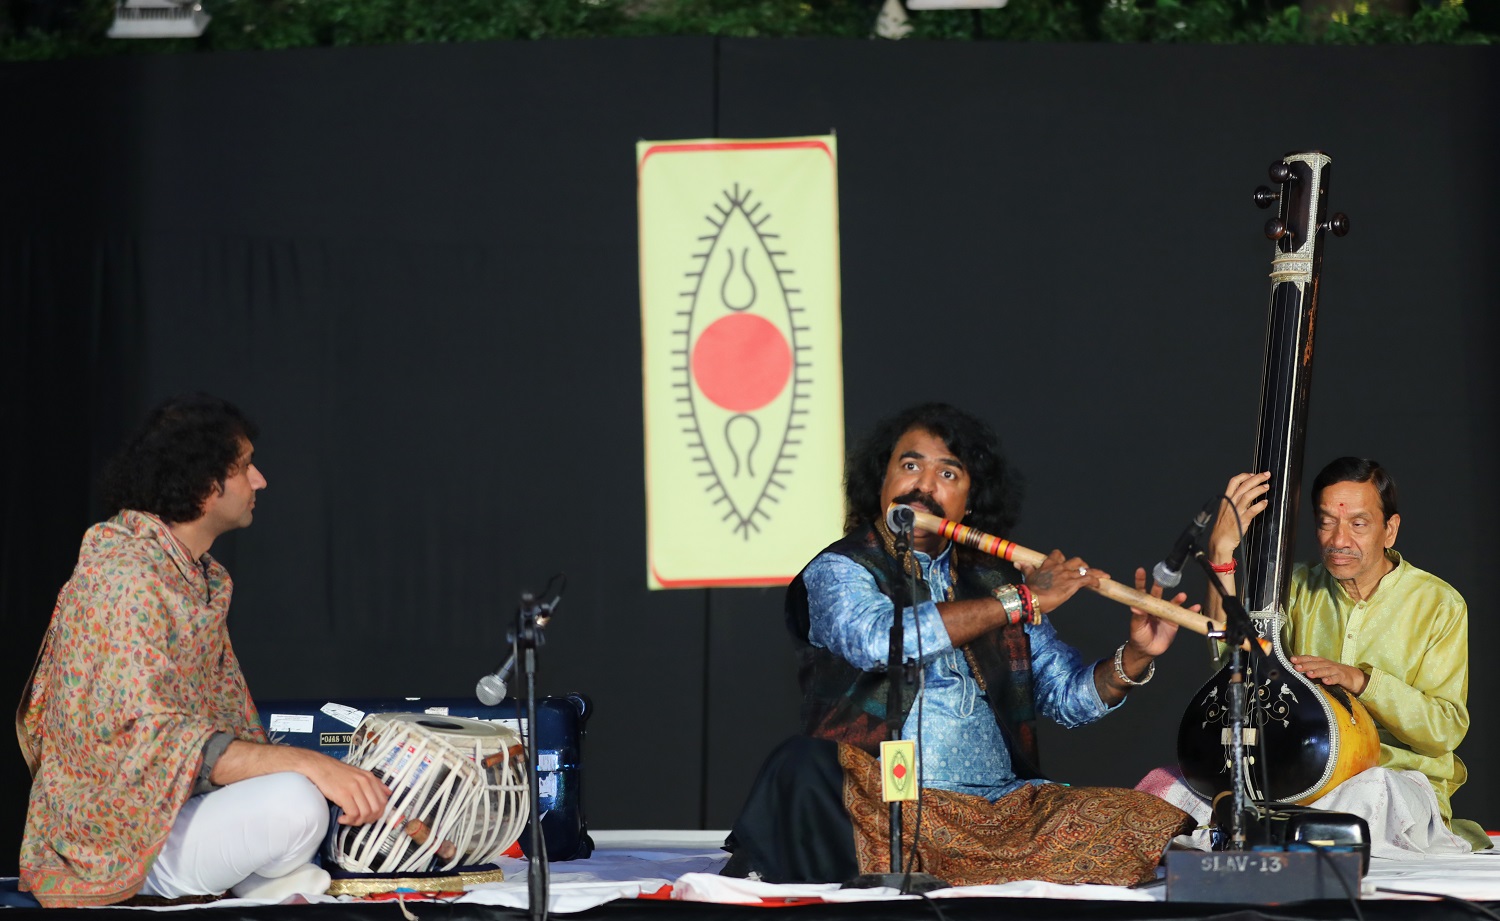 The musical concert concluded with a mesmerizing performance by Hindustani Flute artist Pravin Godkhindi.